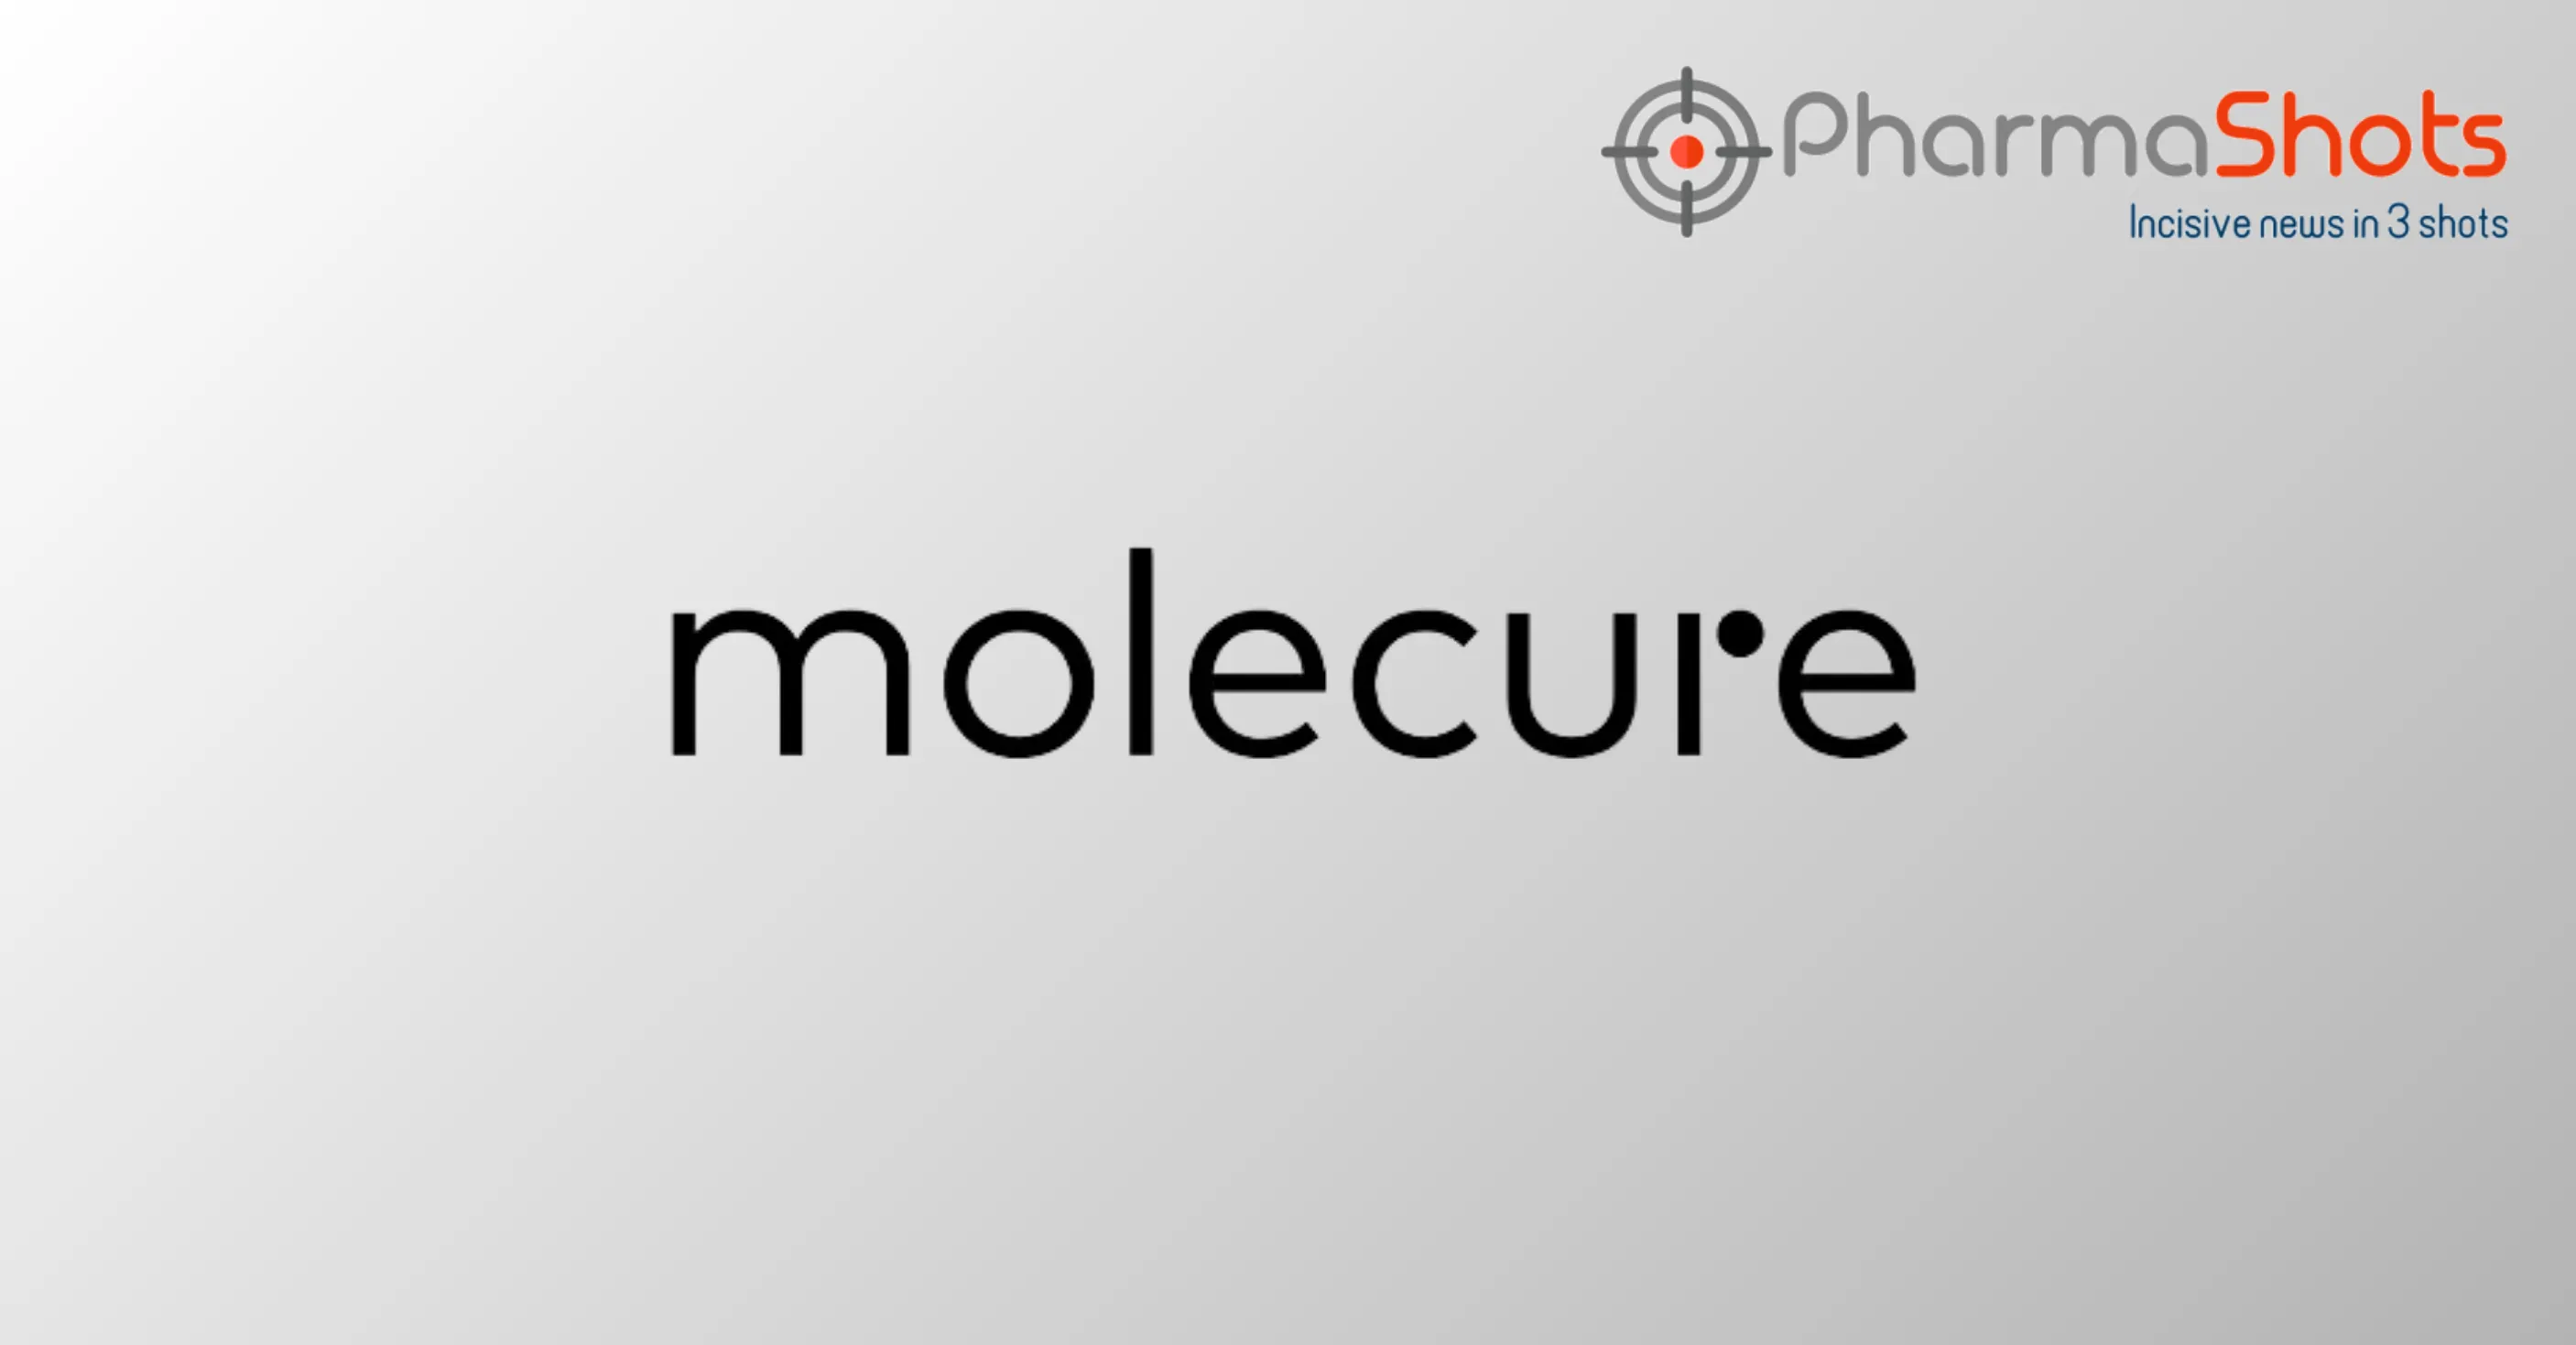 Molecure Reports First Patient Dosing with OATD-01 Under the P-II (KITE) Trial to Treat Pulmonary Sarcoidosis